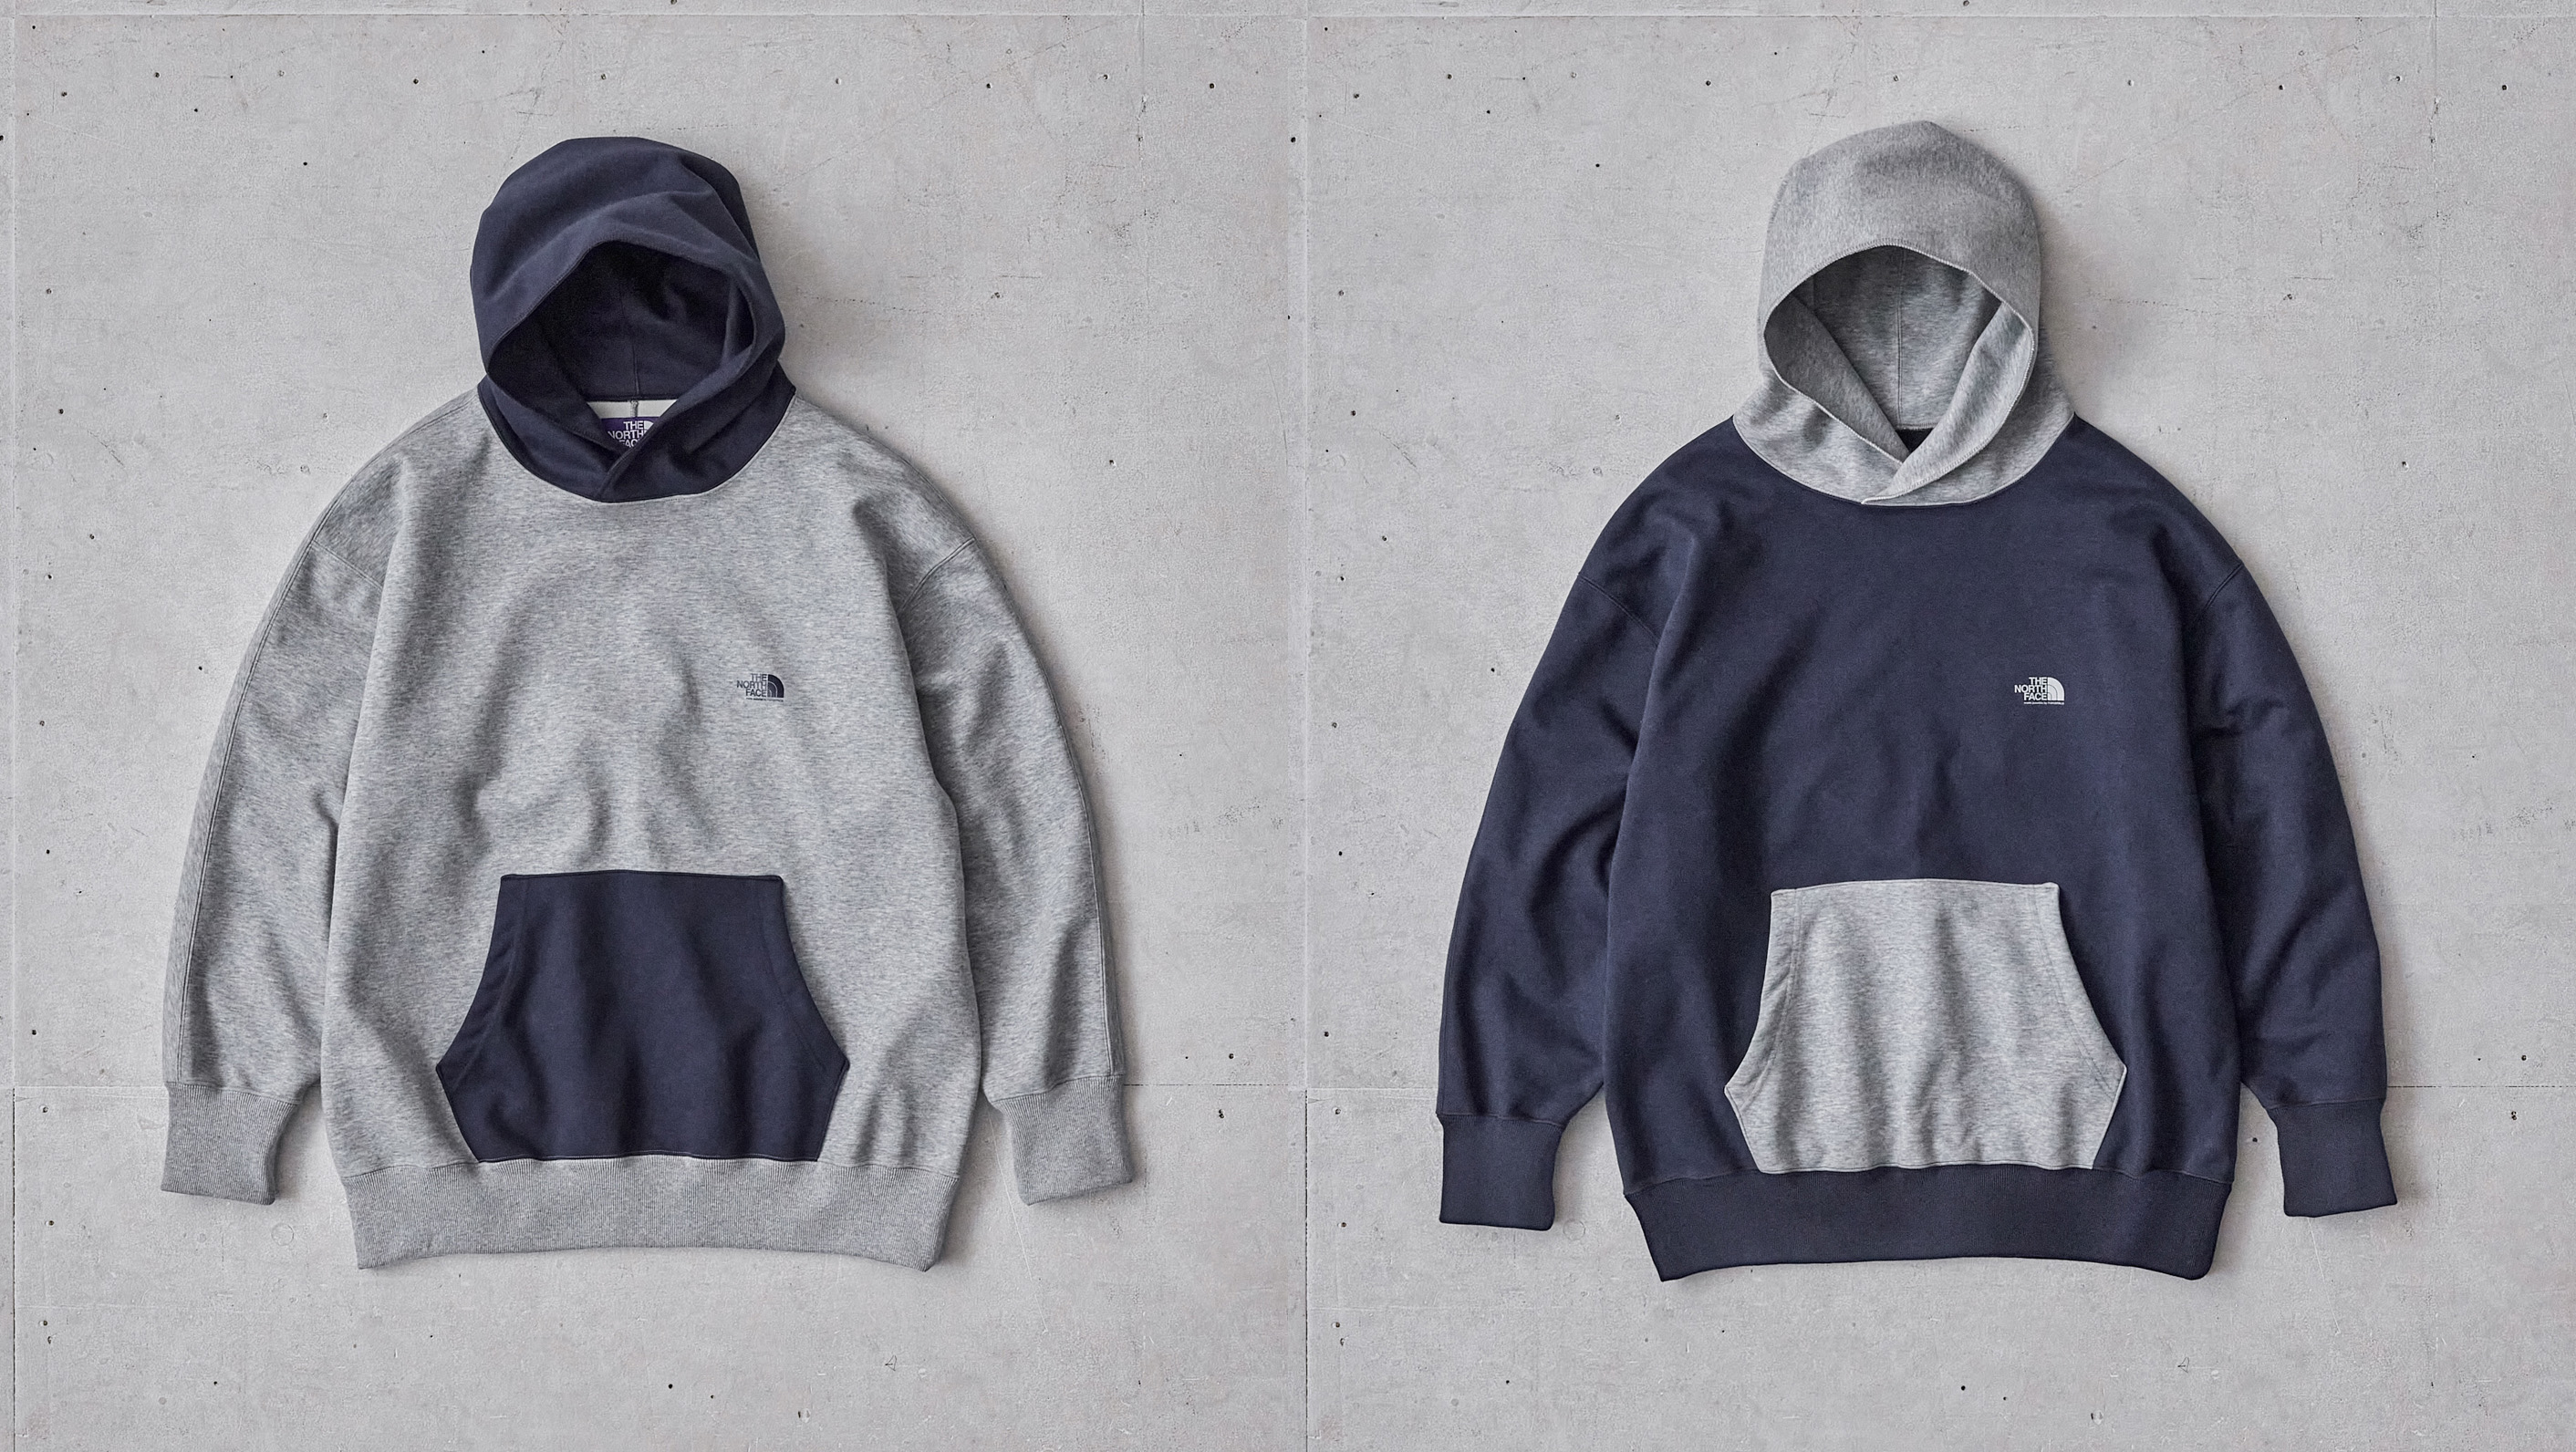 nanamica / nanamica launches a limited capsule collection of THE 